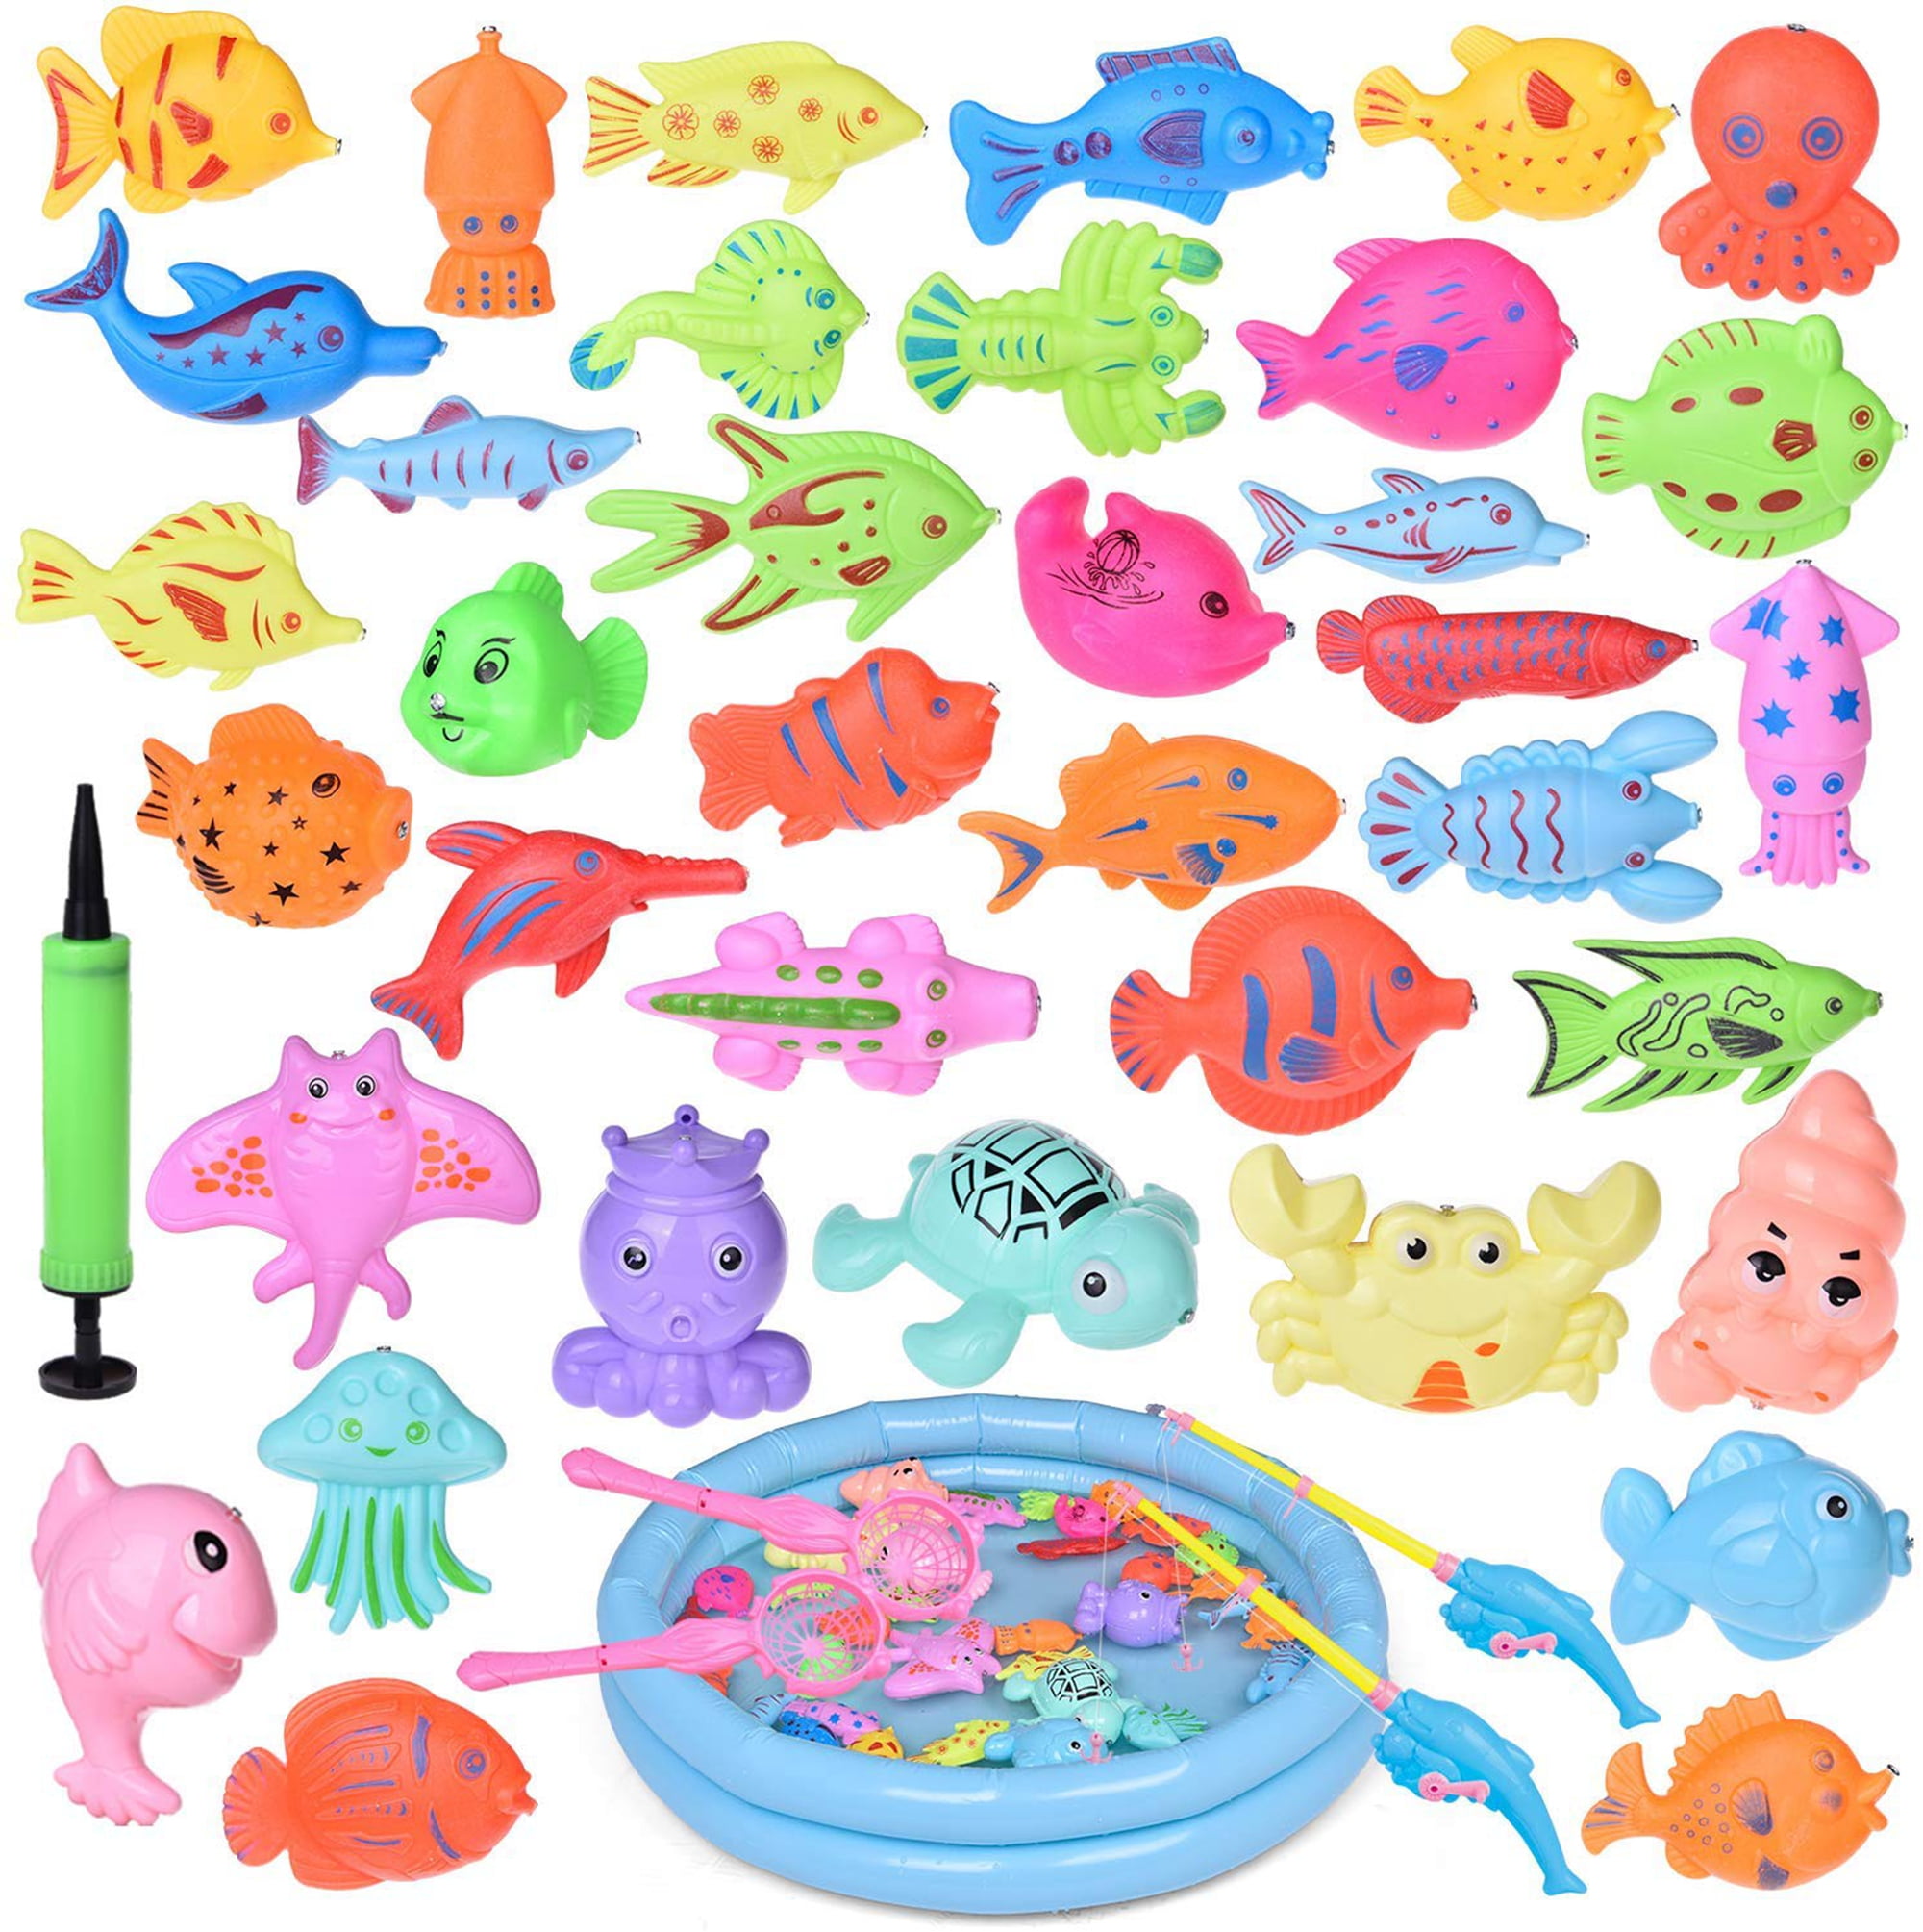 Fishing Game Playset a fishing pool,4 magnetic fishing rods,20 pieces of fish 